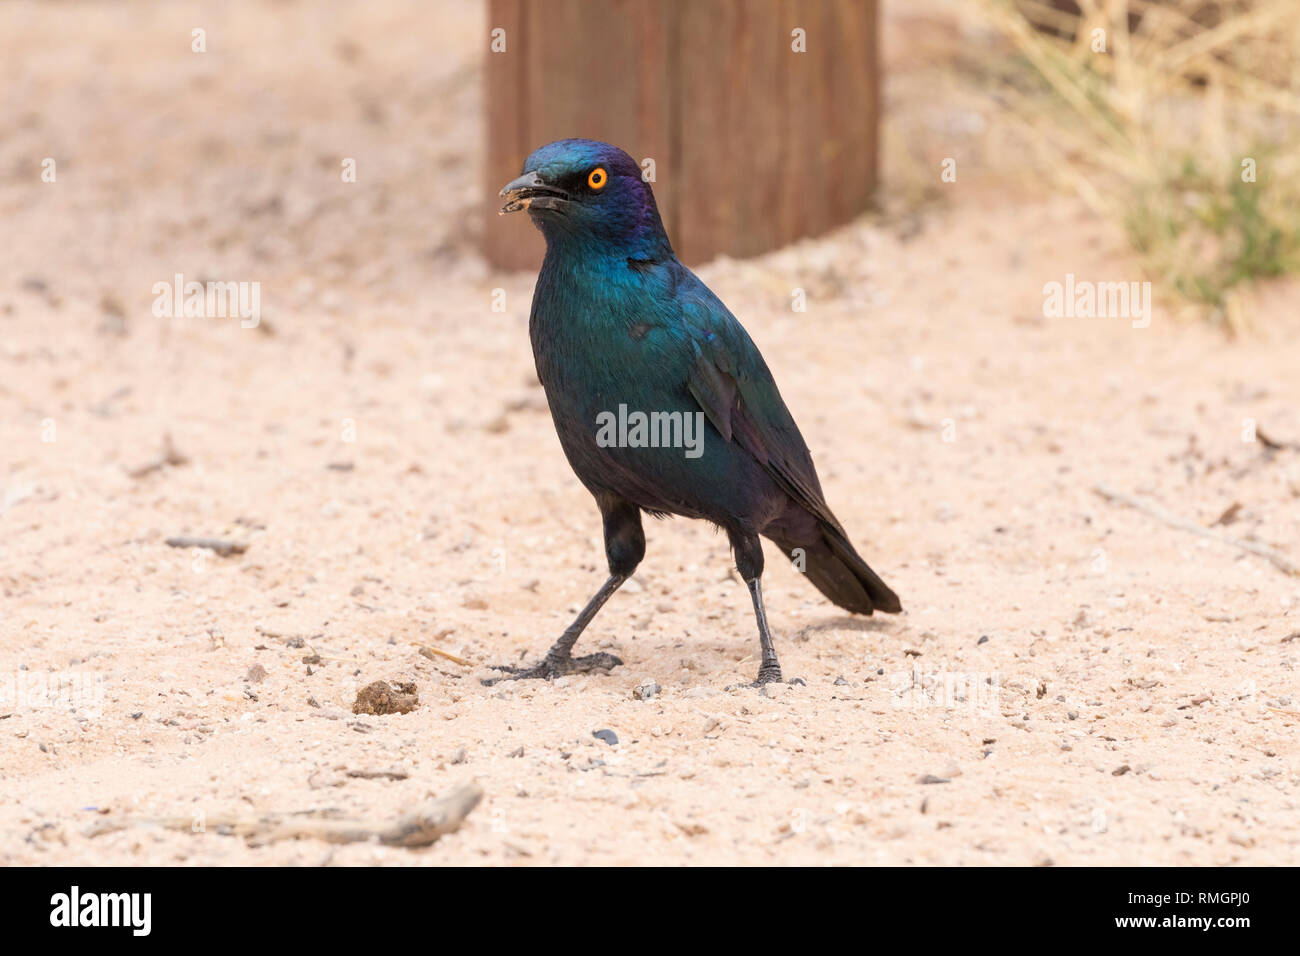 Red-shouldered / Cape glossy starling, Lamprotornis nitens,  foraging on sand, Kgalagadi Transfrontier Park,, Northern Cape, South Africa Stock Photo